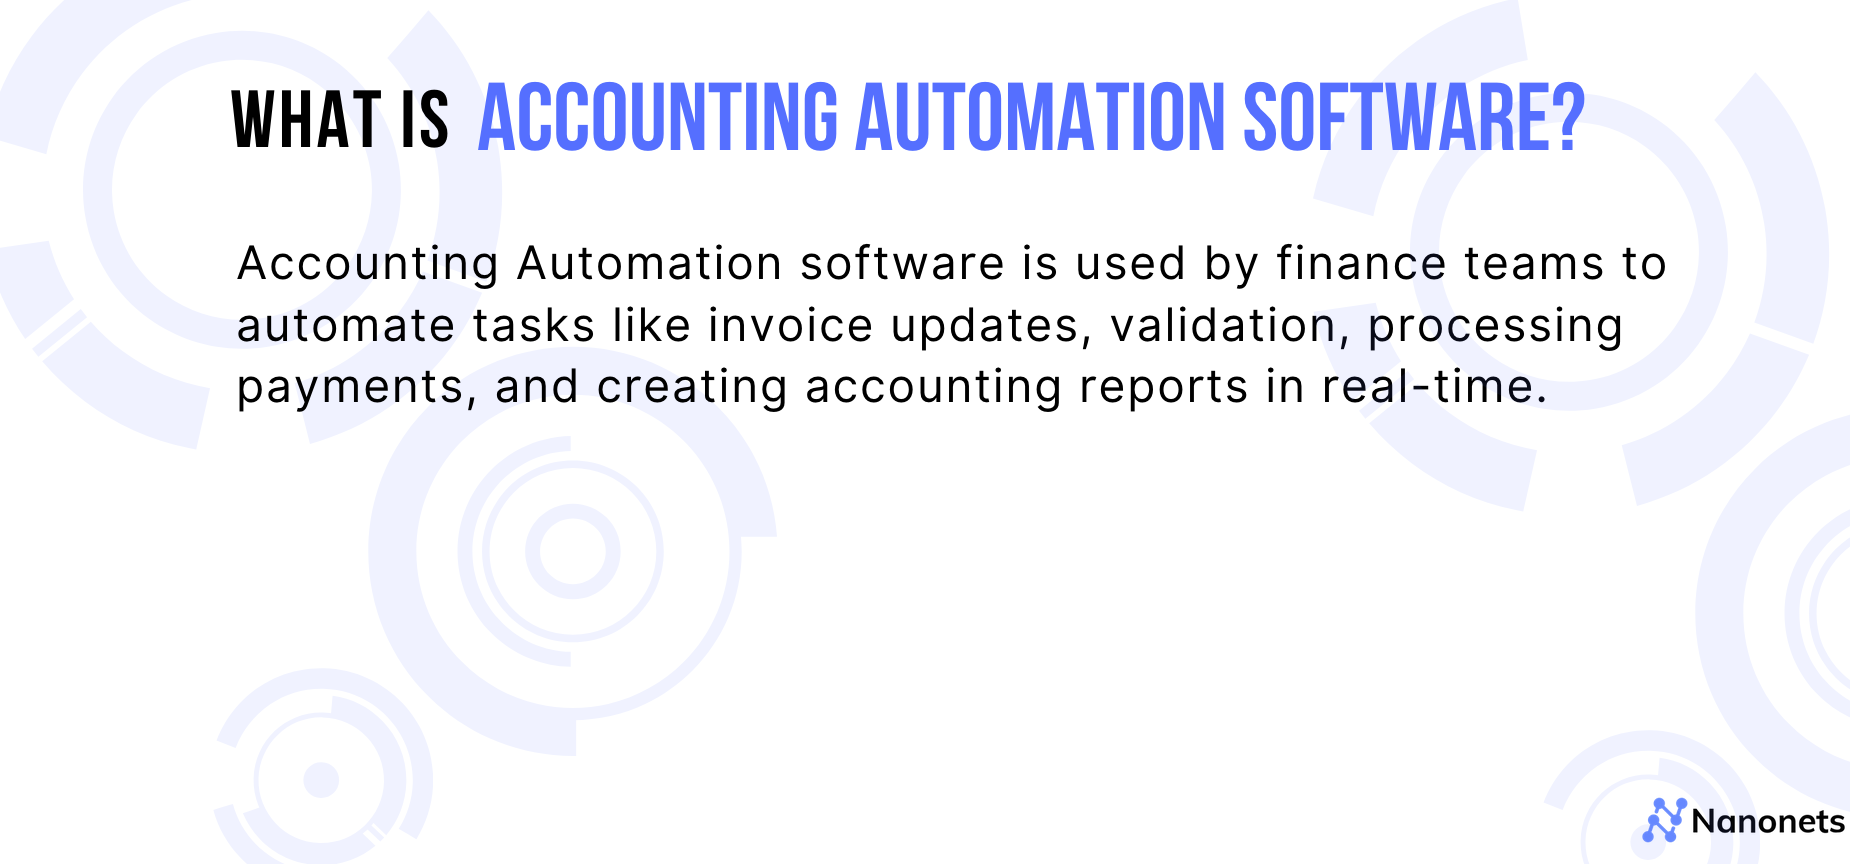 Accounting Automation Software definition 